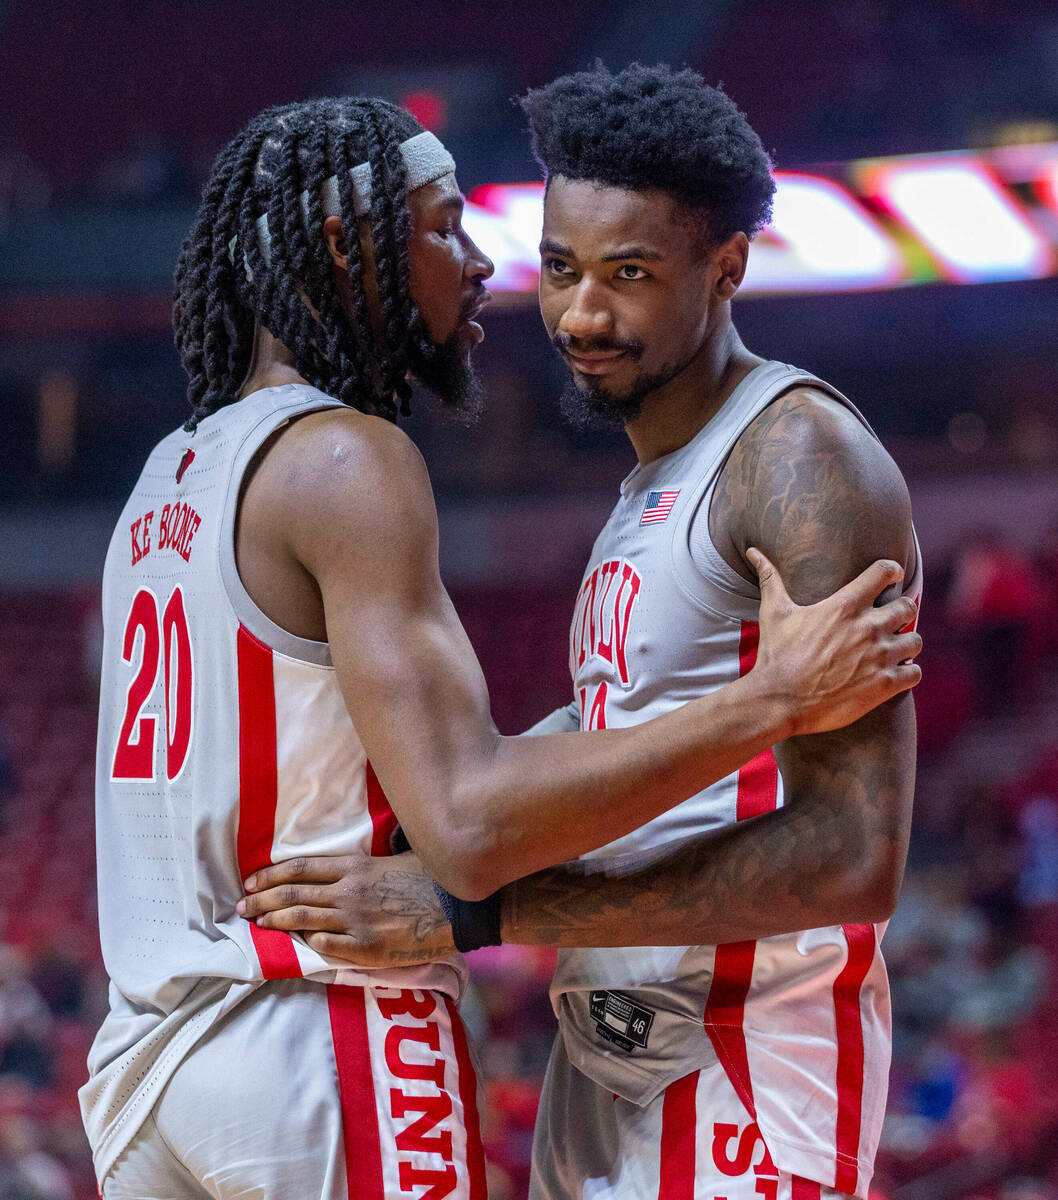 UNLV forward Keylan Boone (20) and his brother UNLV forward Kalib Boone (10) come together to t ...